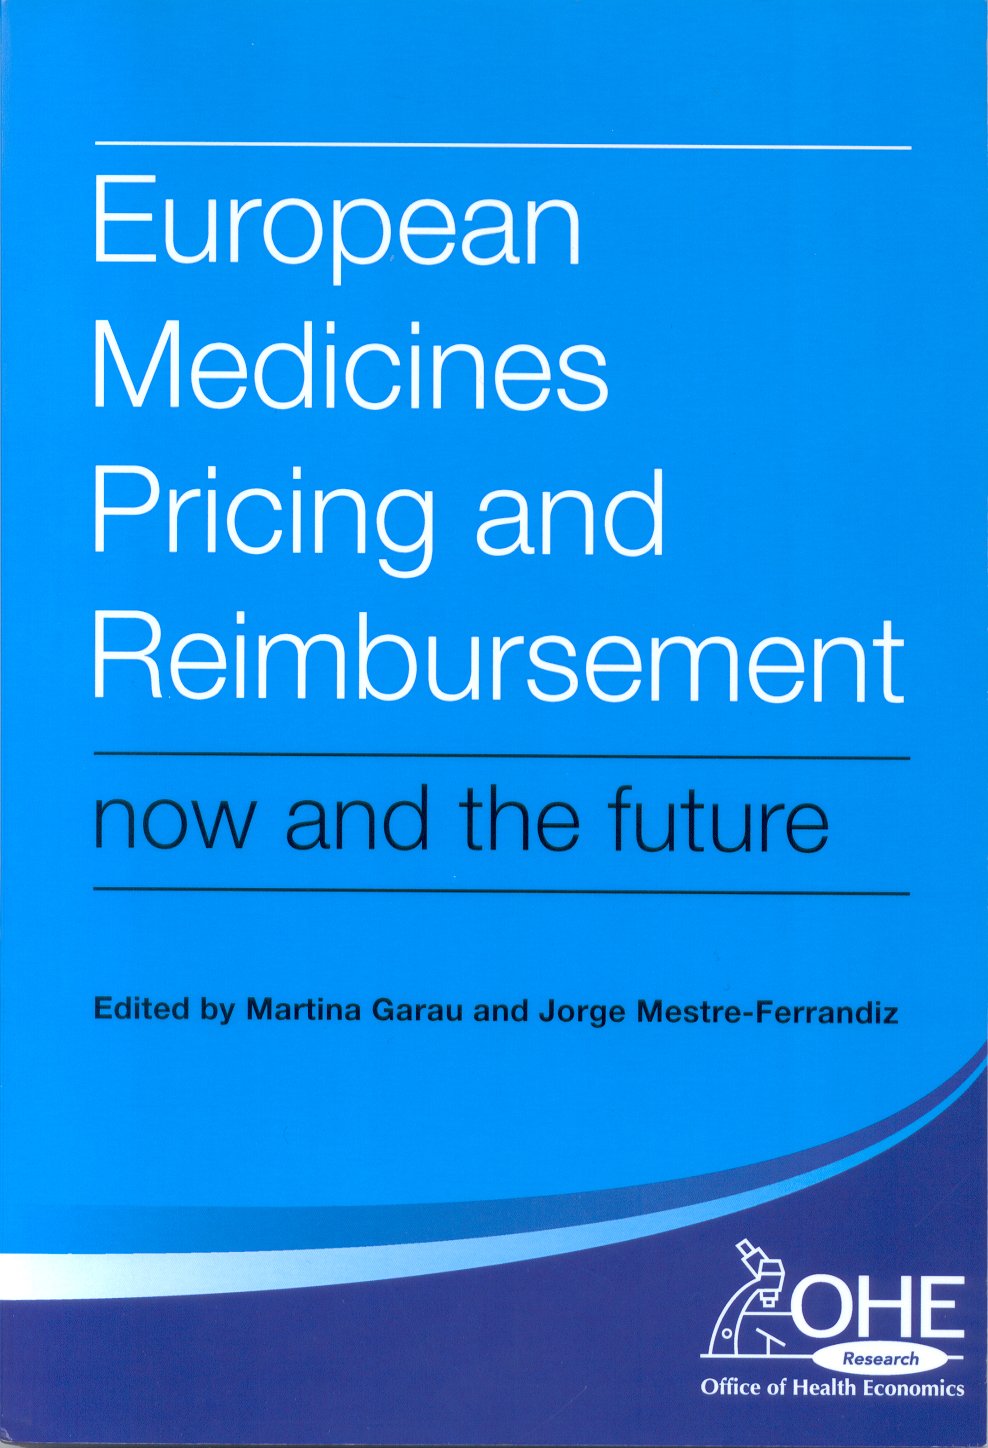 European Medicines Pricing and Reimbursement: Now and the Future